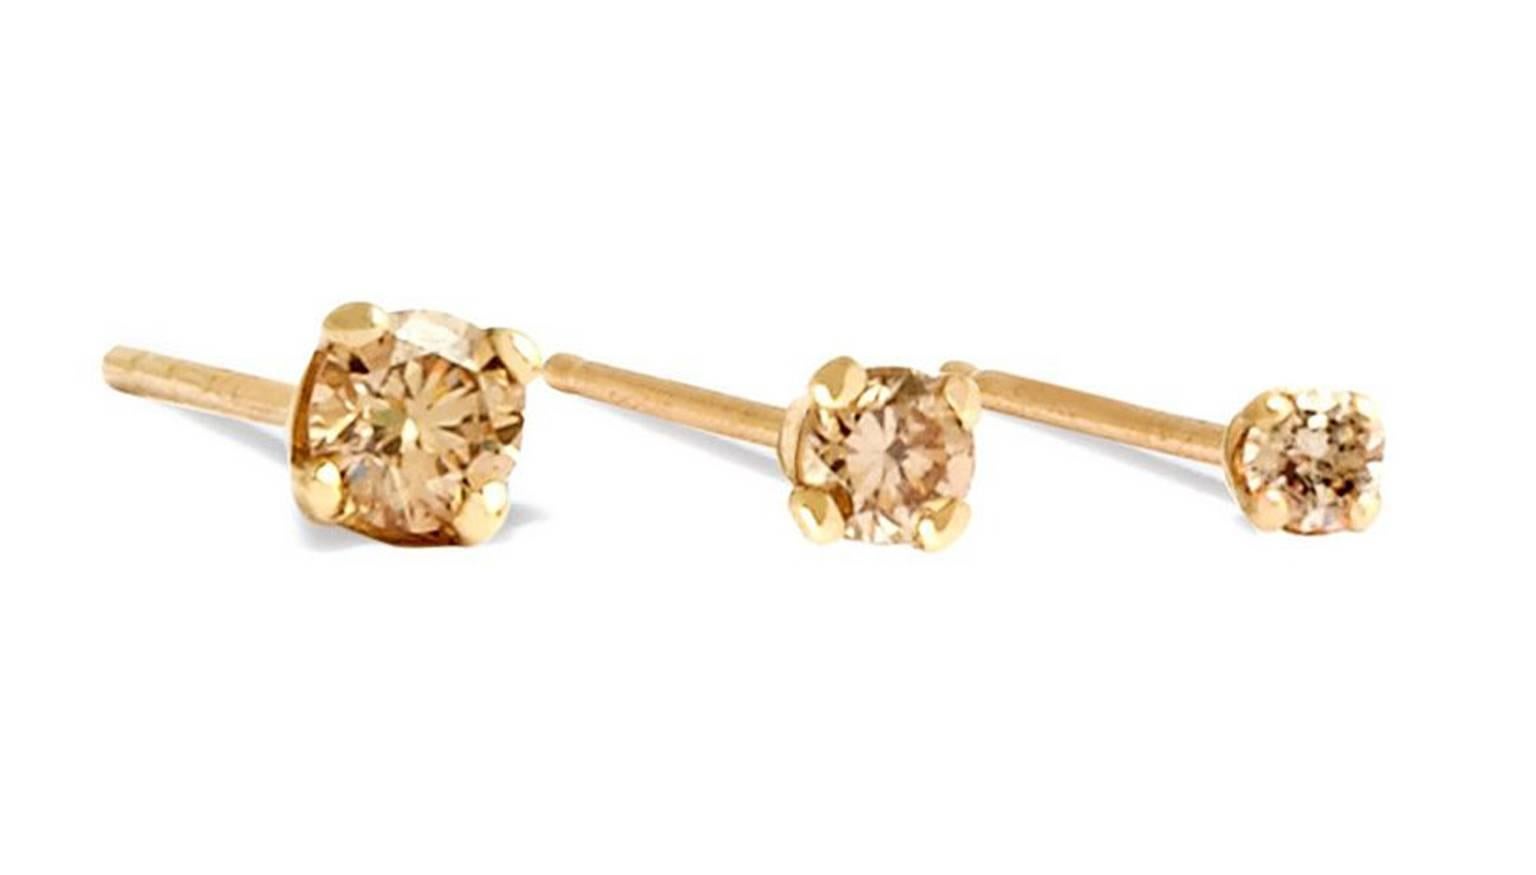 Sparkling cognac diamond stud earring set in 9-carat yellow gold.  Sold individually, each stud features a 0.12 carat round brilliant cut cognac diamond.  Measuring approximately 3.2 mm in diameter, this is the largest size of our range of three